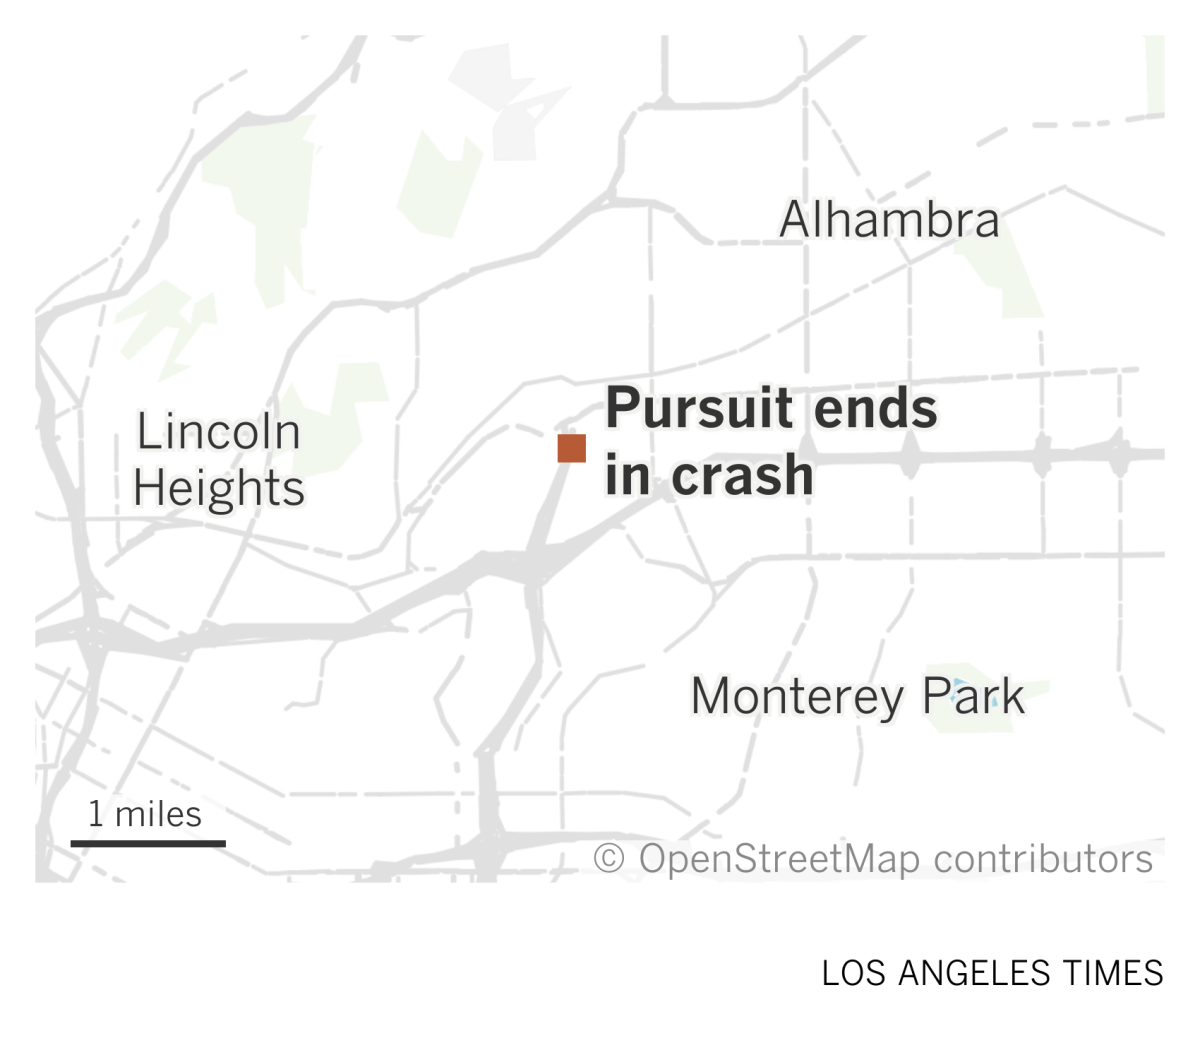 A map of the Eastside of Los Angeles shows were a police pursuit ended in a crash near Alhambra